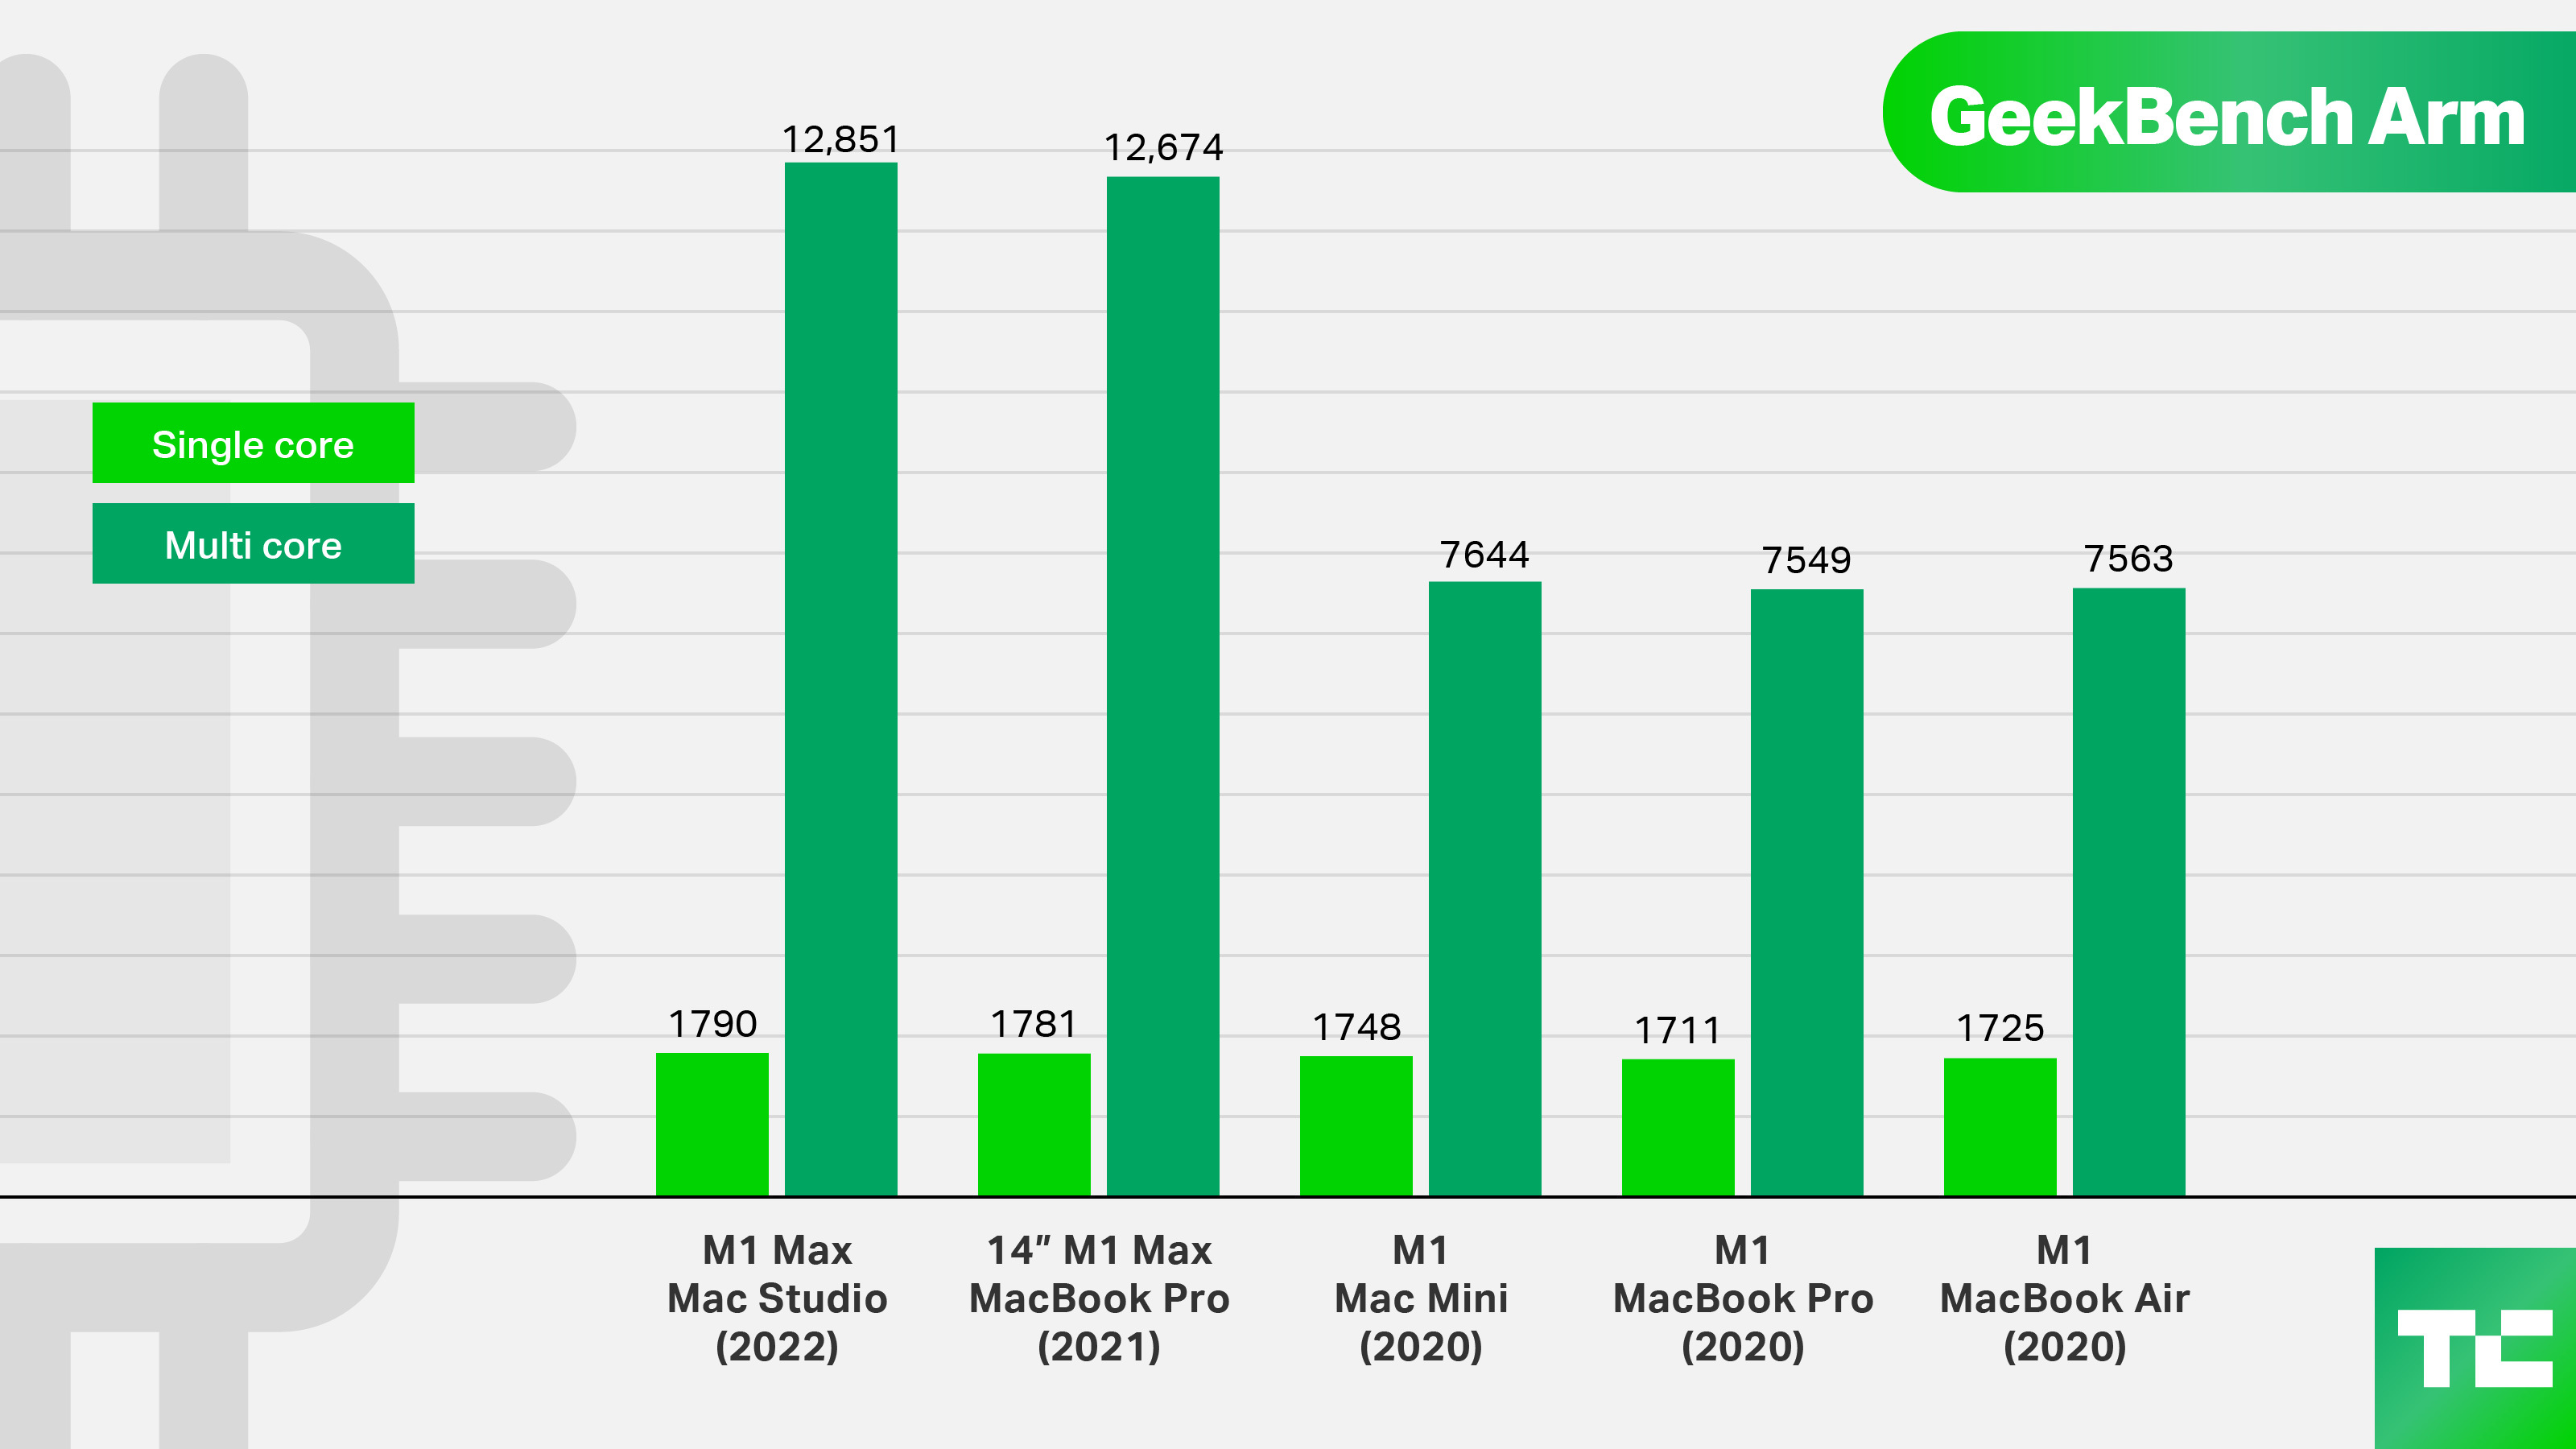 Pricing comparison graph with other Apple Mac products from past releases, GeekBench Arm